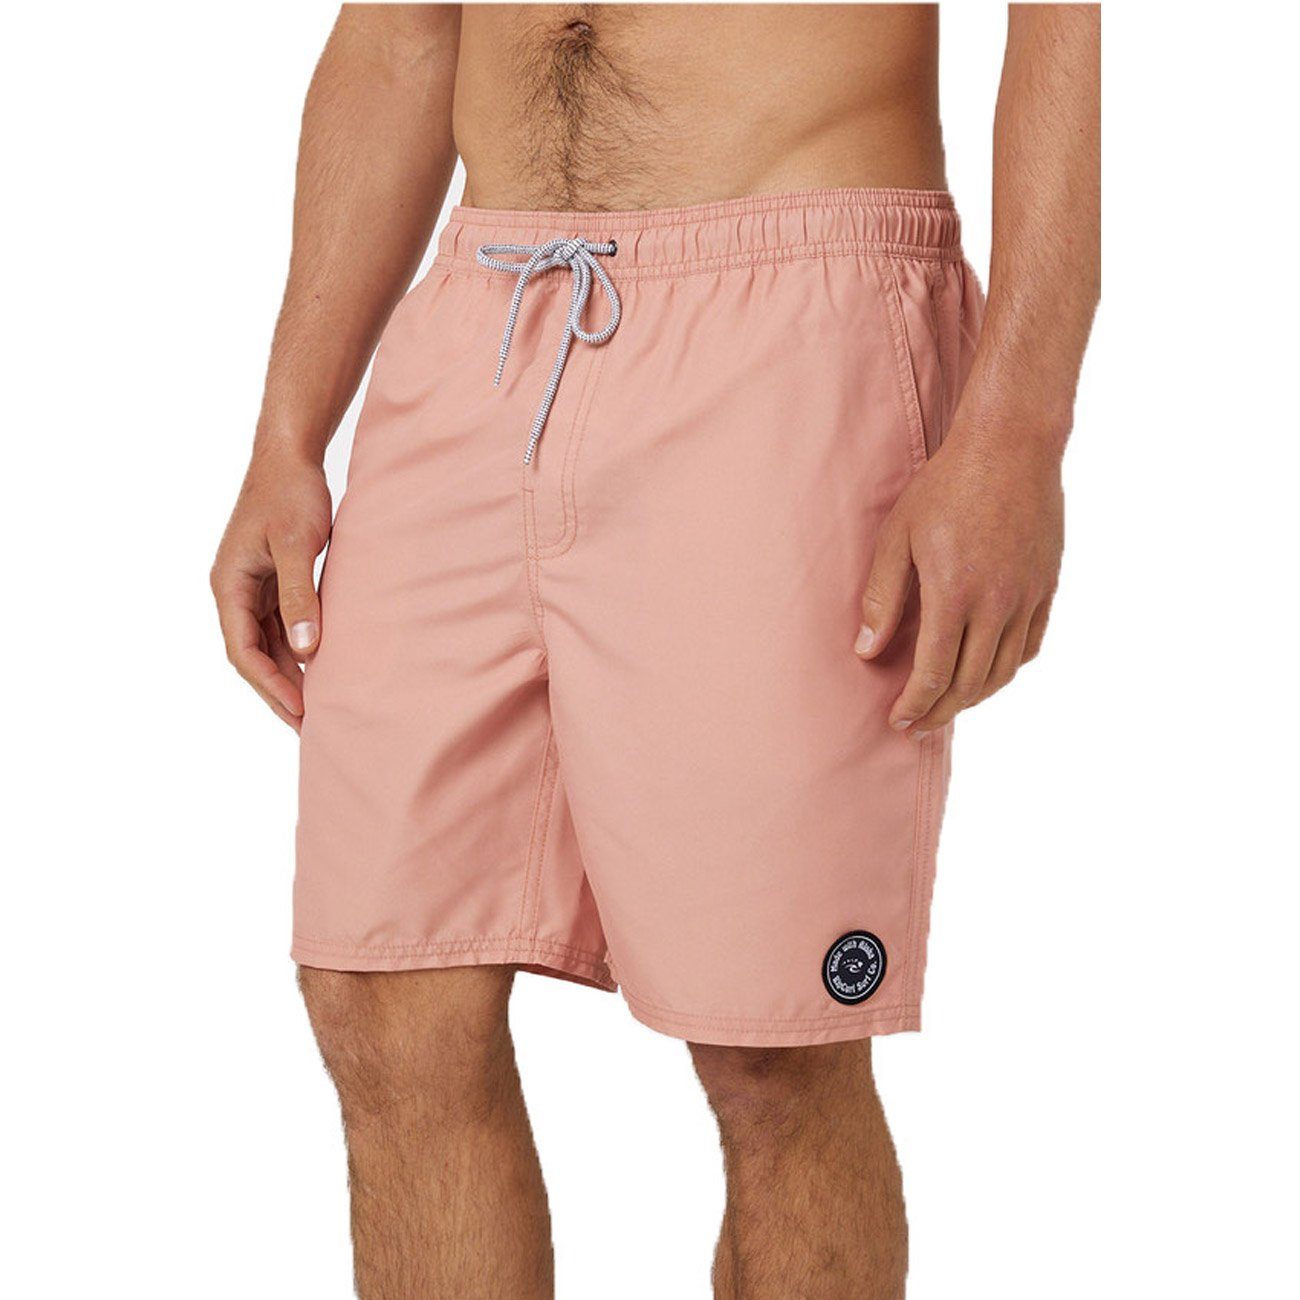 rose LIVING Rip VOLLEY EASY Badeshorts Curl dusty